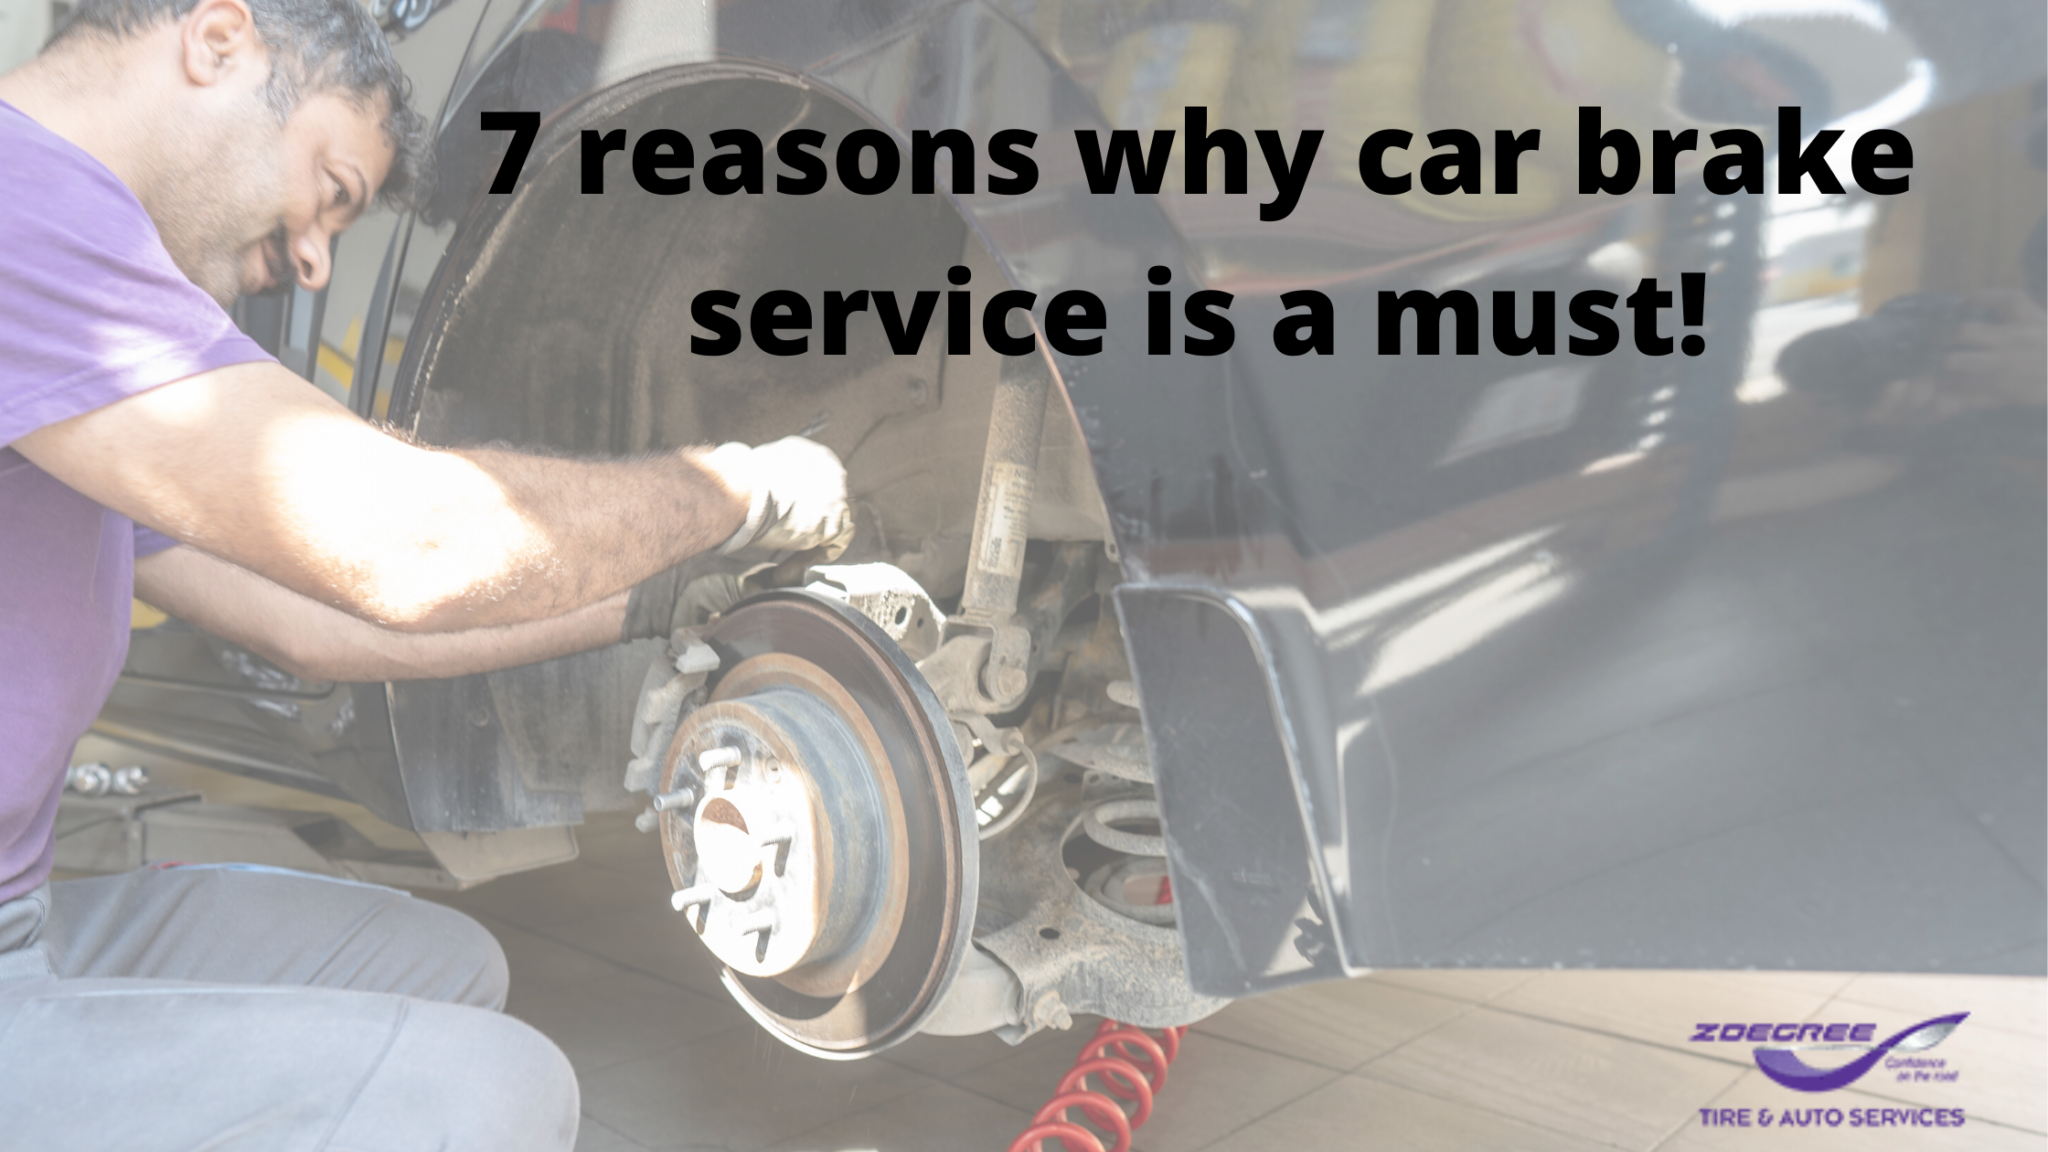 7 reasons why car brake service is a must!